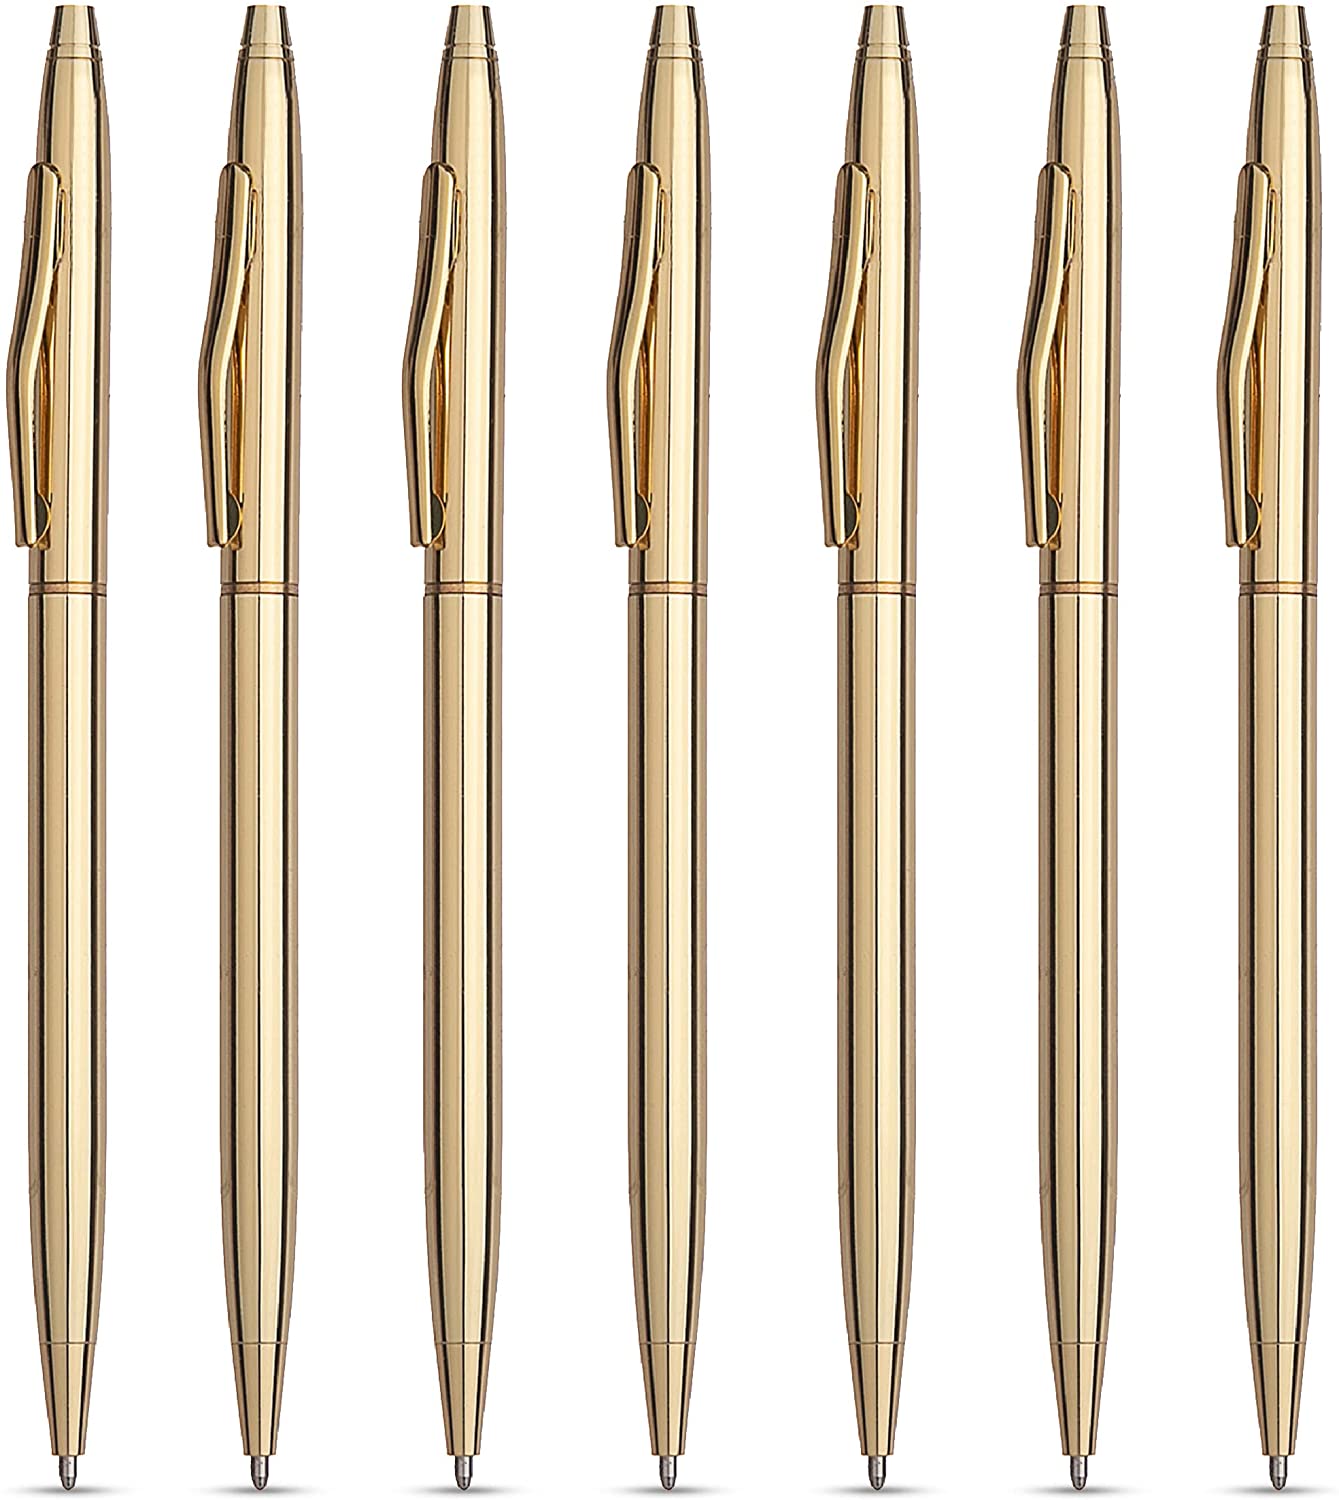 7 Diamond Ballpoint Pens and 7 Slim Gold Pens - Stylish Fancy Office Supplies - 14 Pack